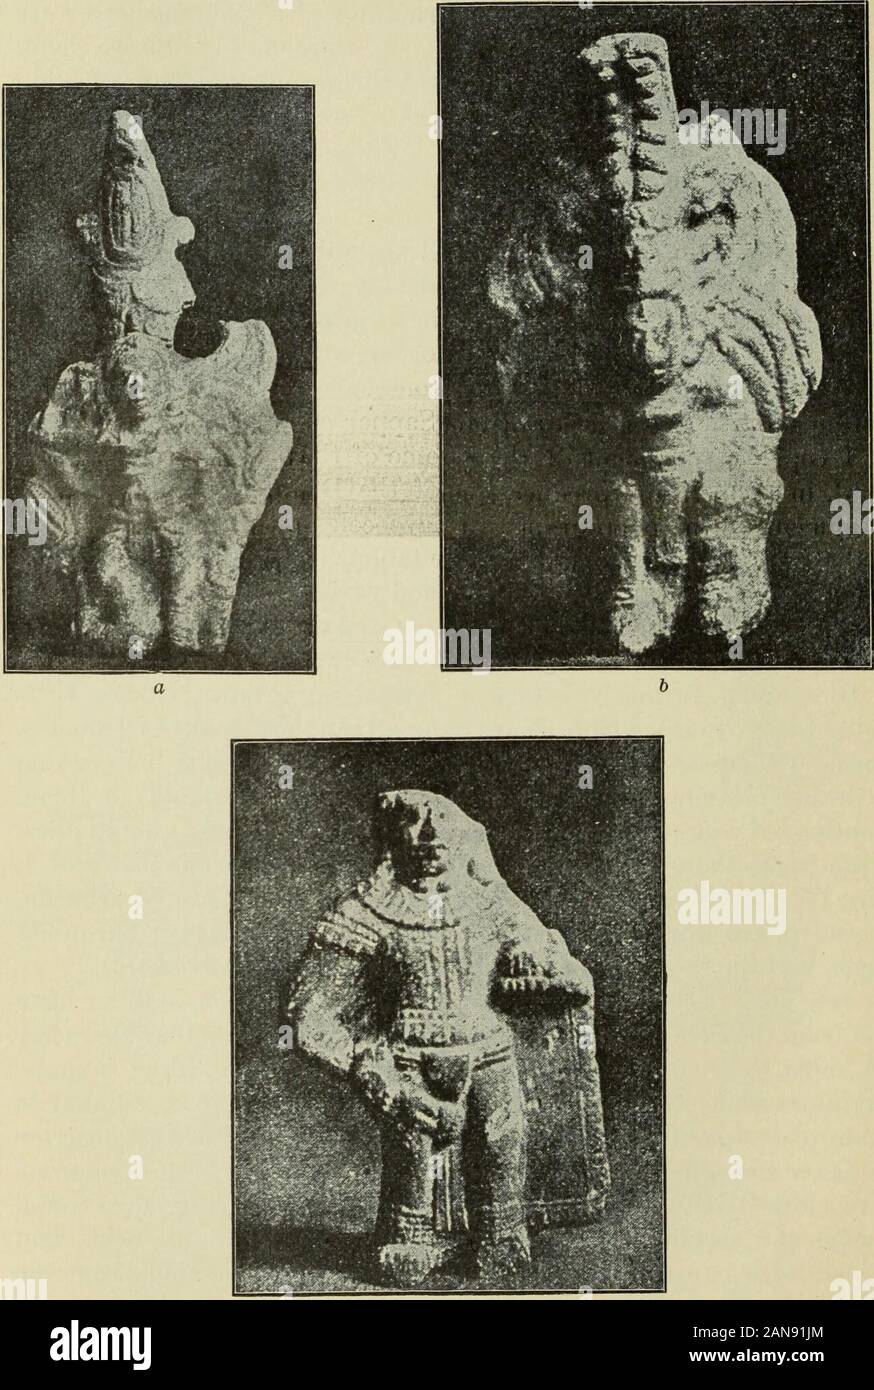 Mexican and Central American antiquities, calendar systems, and history; . ome from the cave of Zabalam, near Coban, are of a peculiar character(^7, ^, and c, figure 21). The material is a brick-red clay, which is some-what more sandy than in the fragments described before, painted incertain places partly light-blue and partly white. The whole construc-tion has something reniarkably modern about it; the first, shows afigure clothed with a maxtlatl and a loin cloth, wearing large roundear pegs and a cylindric stone bead on a cord around the neck, andadorned with great winglike feather ornaments Stock Photo